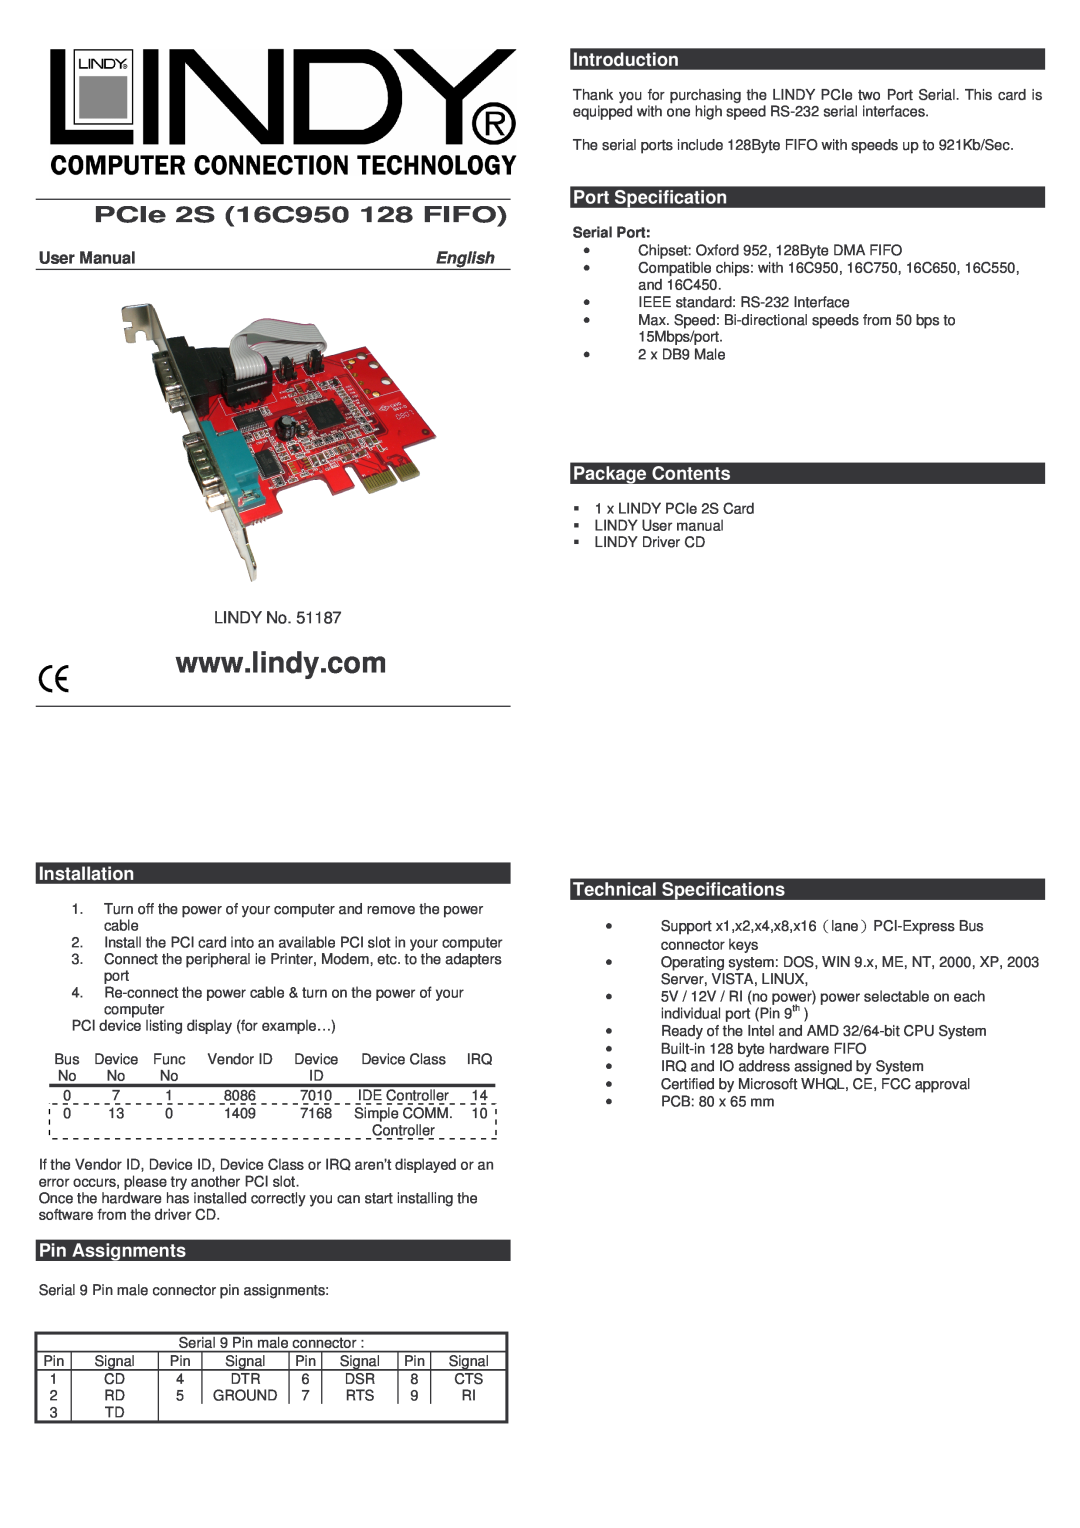 Lindy 51187 technical specifications Introduction, Port Specification, Installation, Pin Assignments, Package Contents 